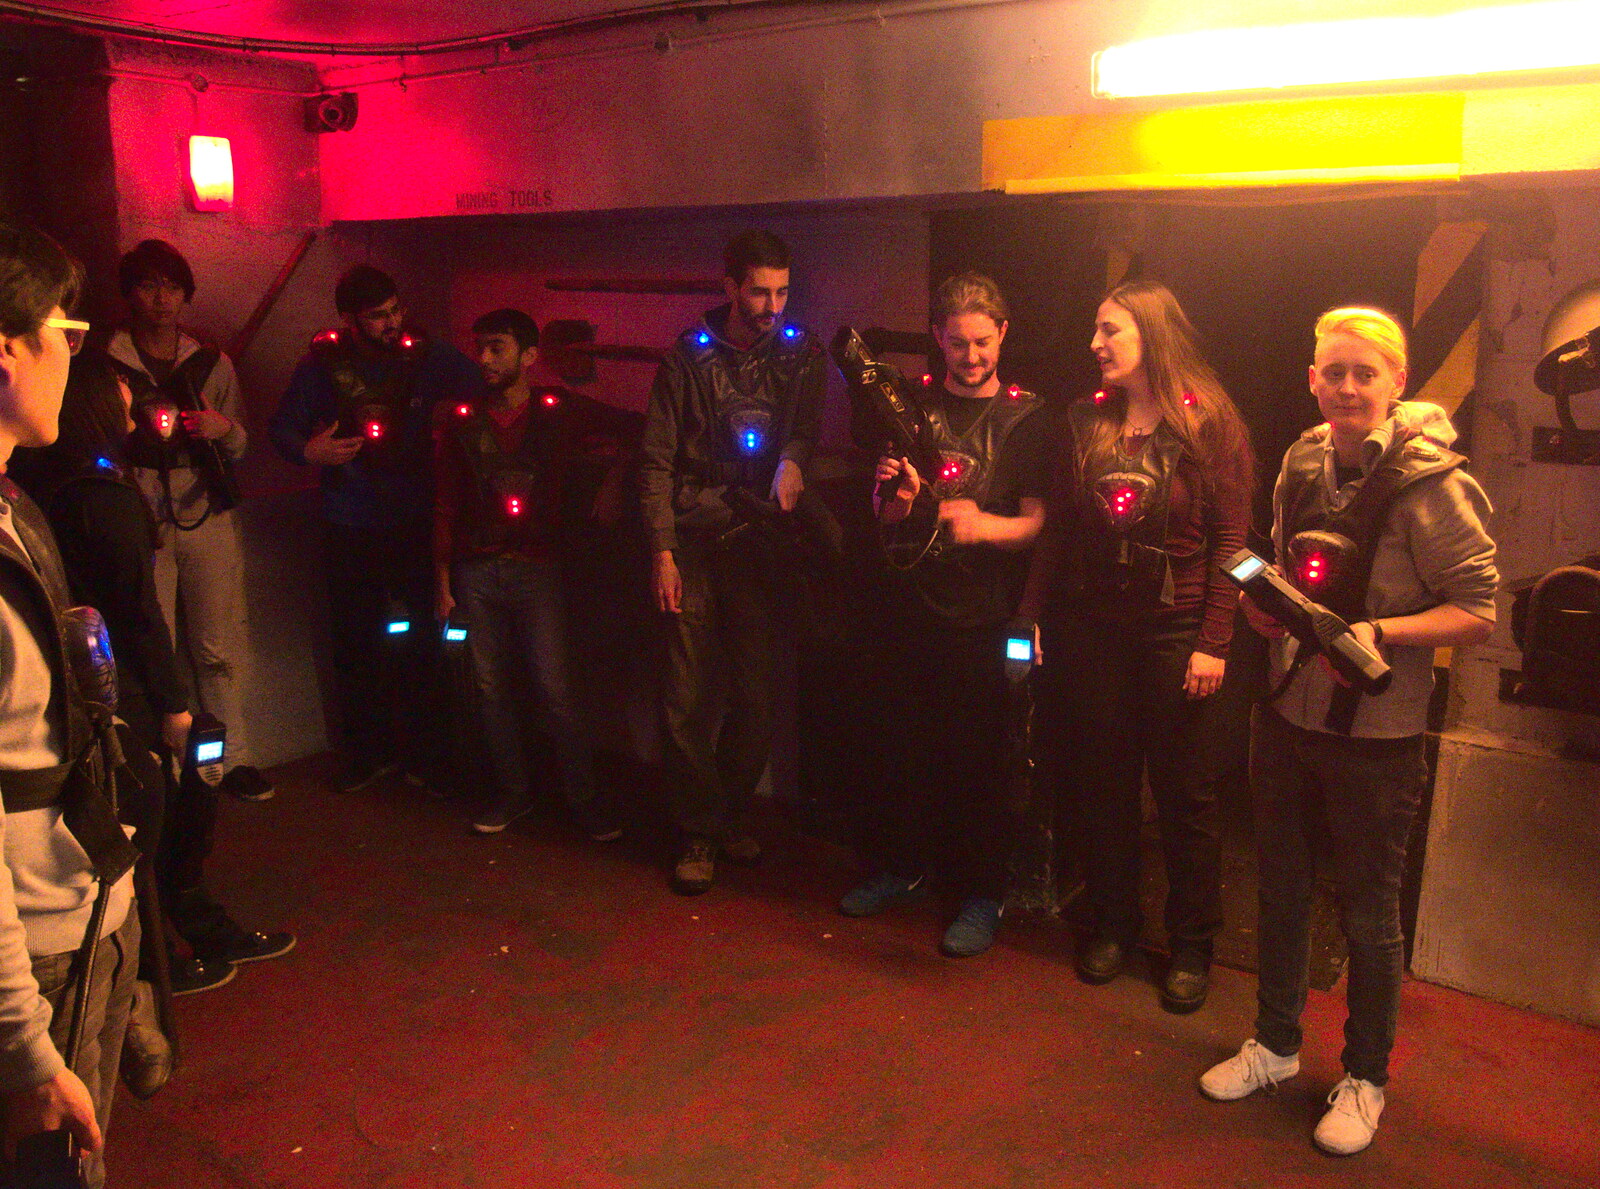  from SwiftKey Does Laser Tag, Charlton and Greenwich, London - 29th November 2016